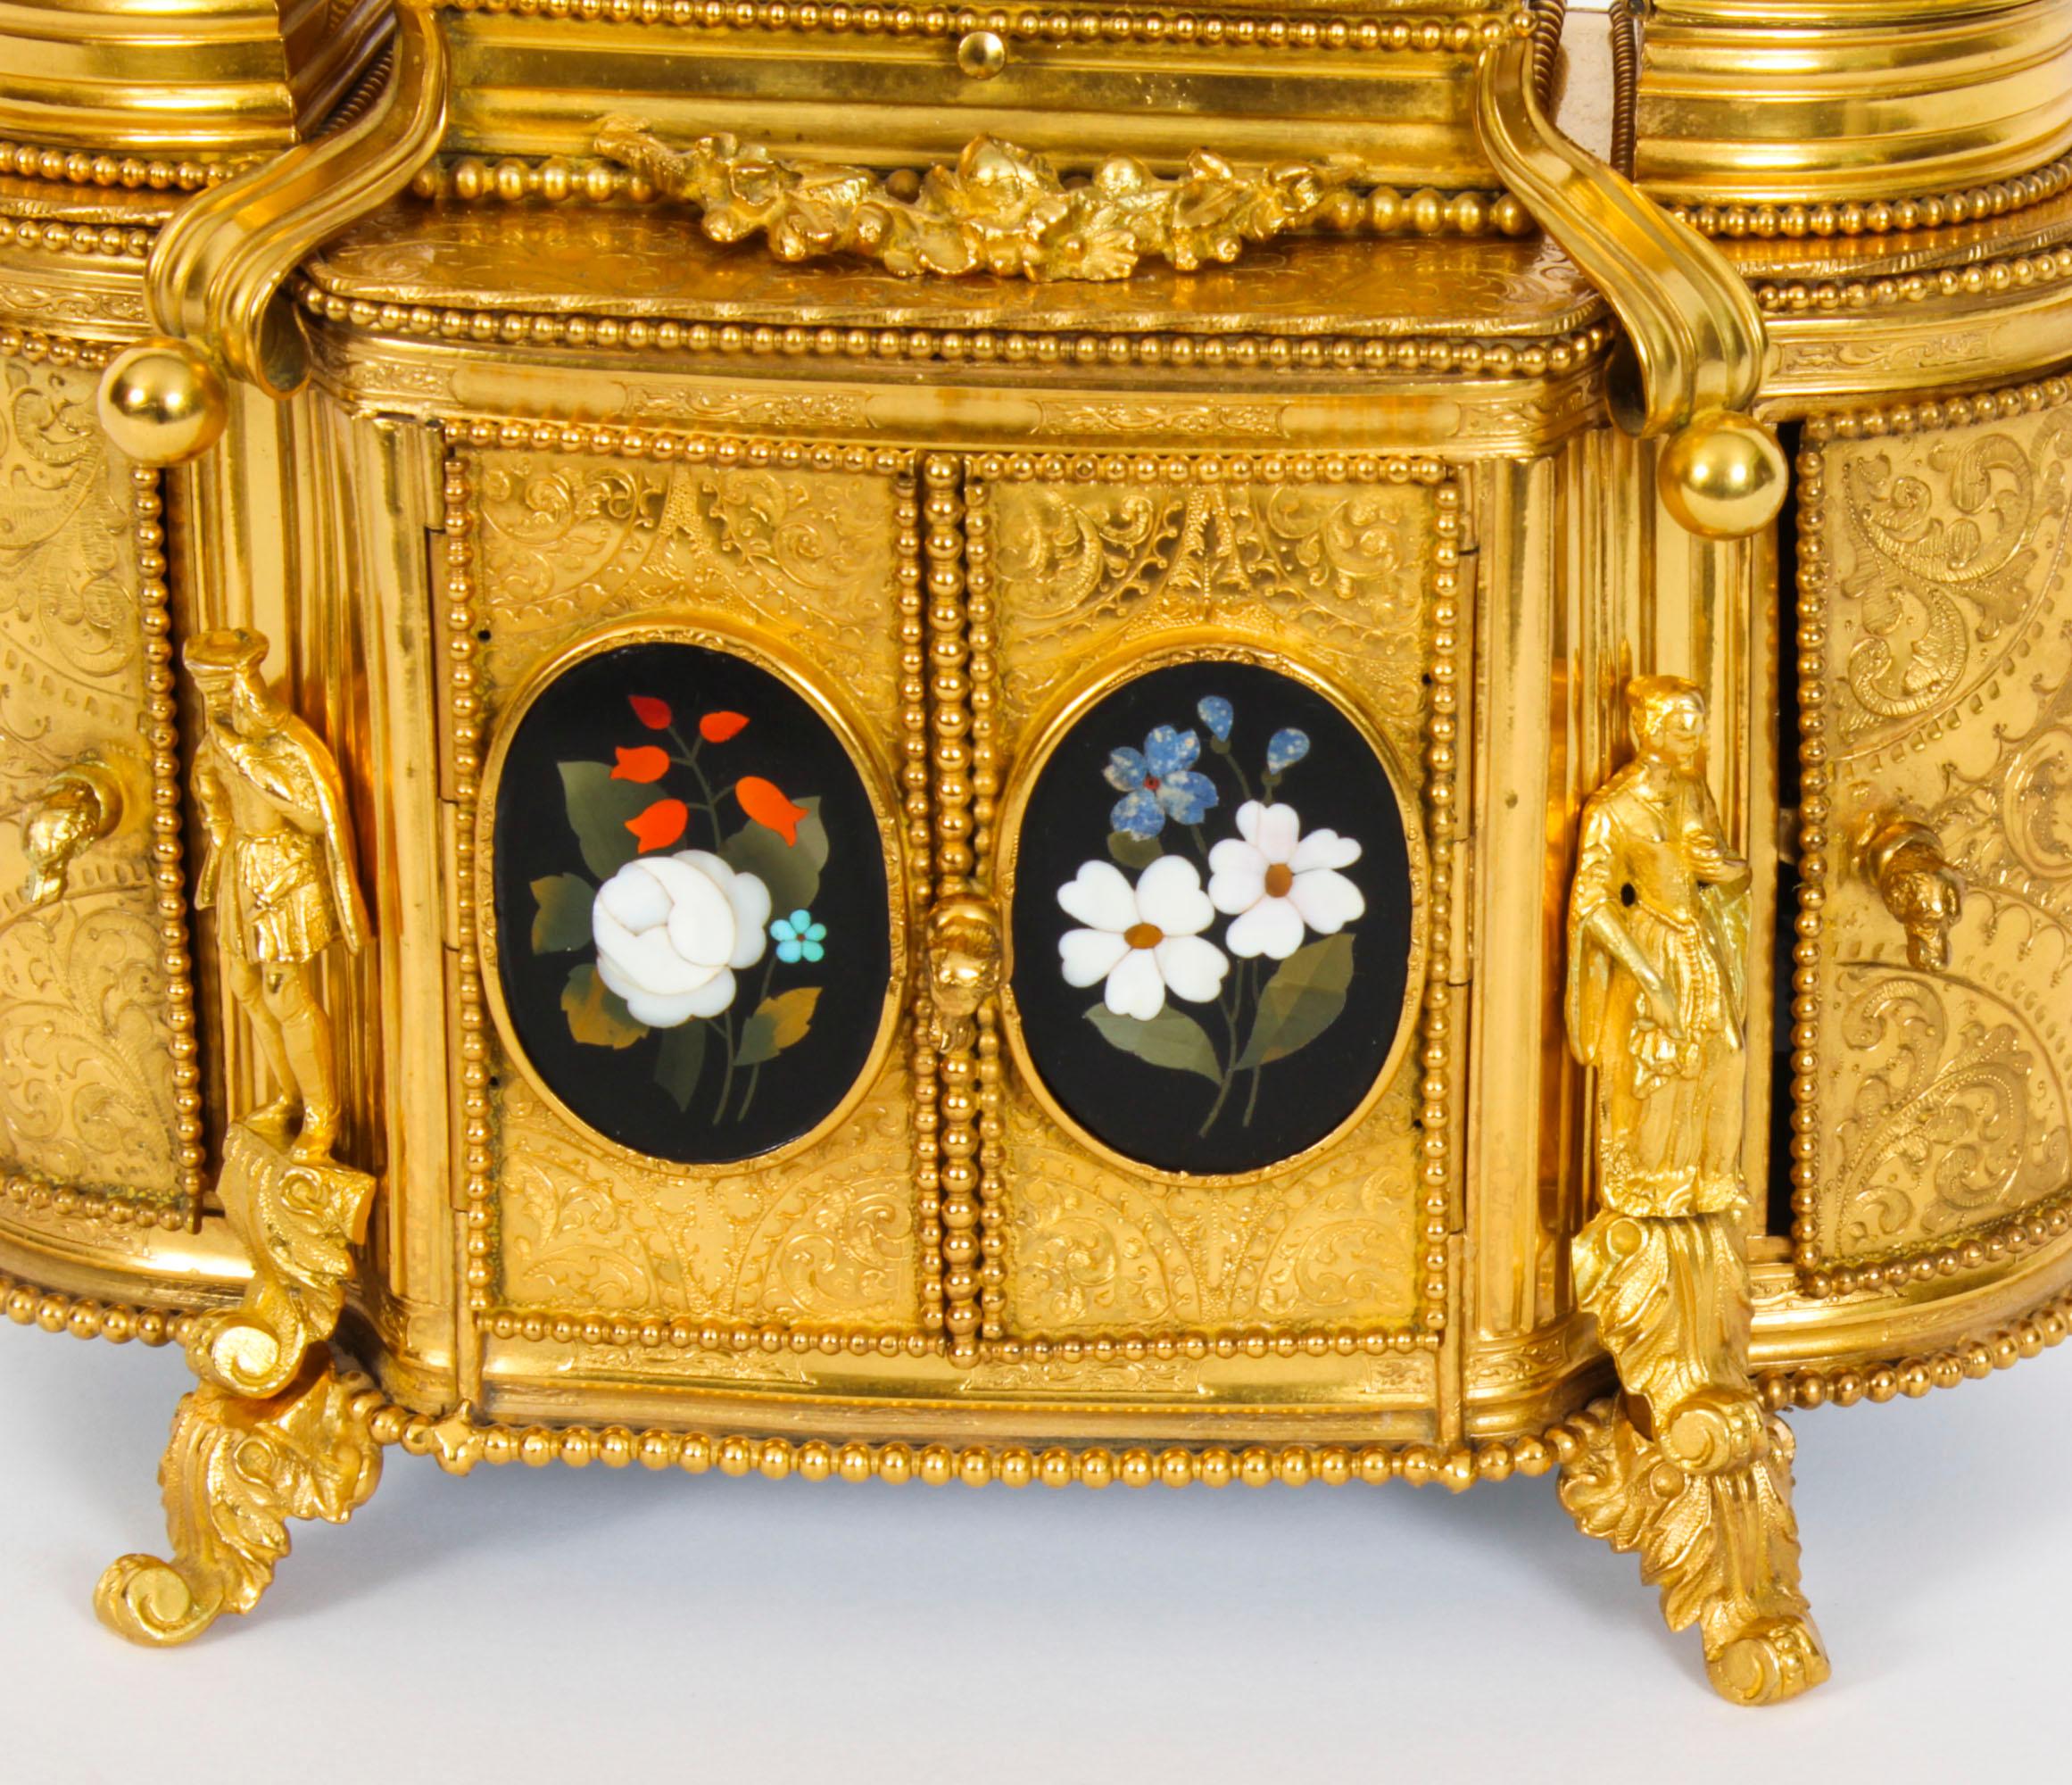 Antique Ormolu Mounted Pietra Dura Jewellery Cabinet 19th C In Good Condition For Sale In London, GB